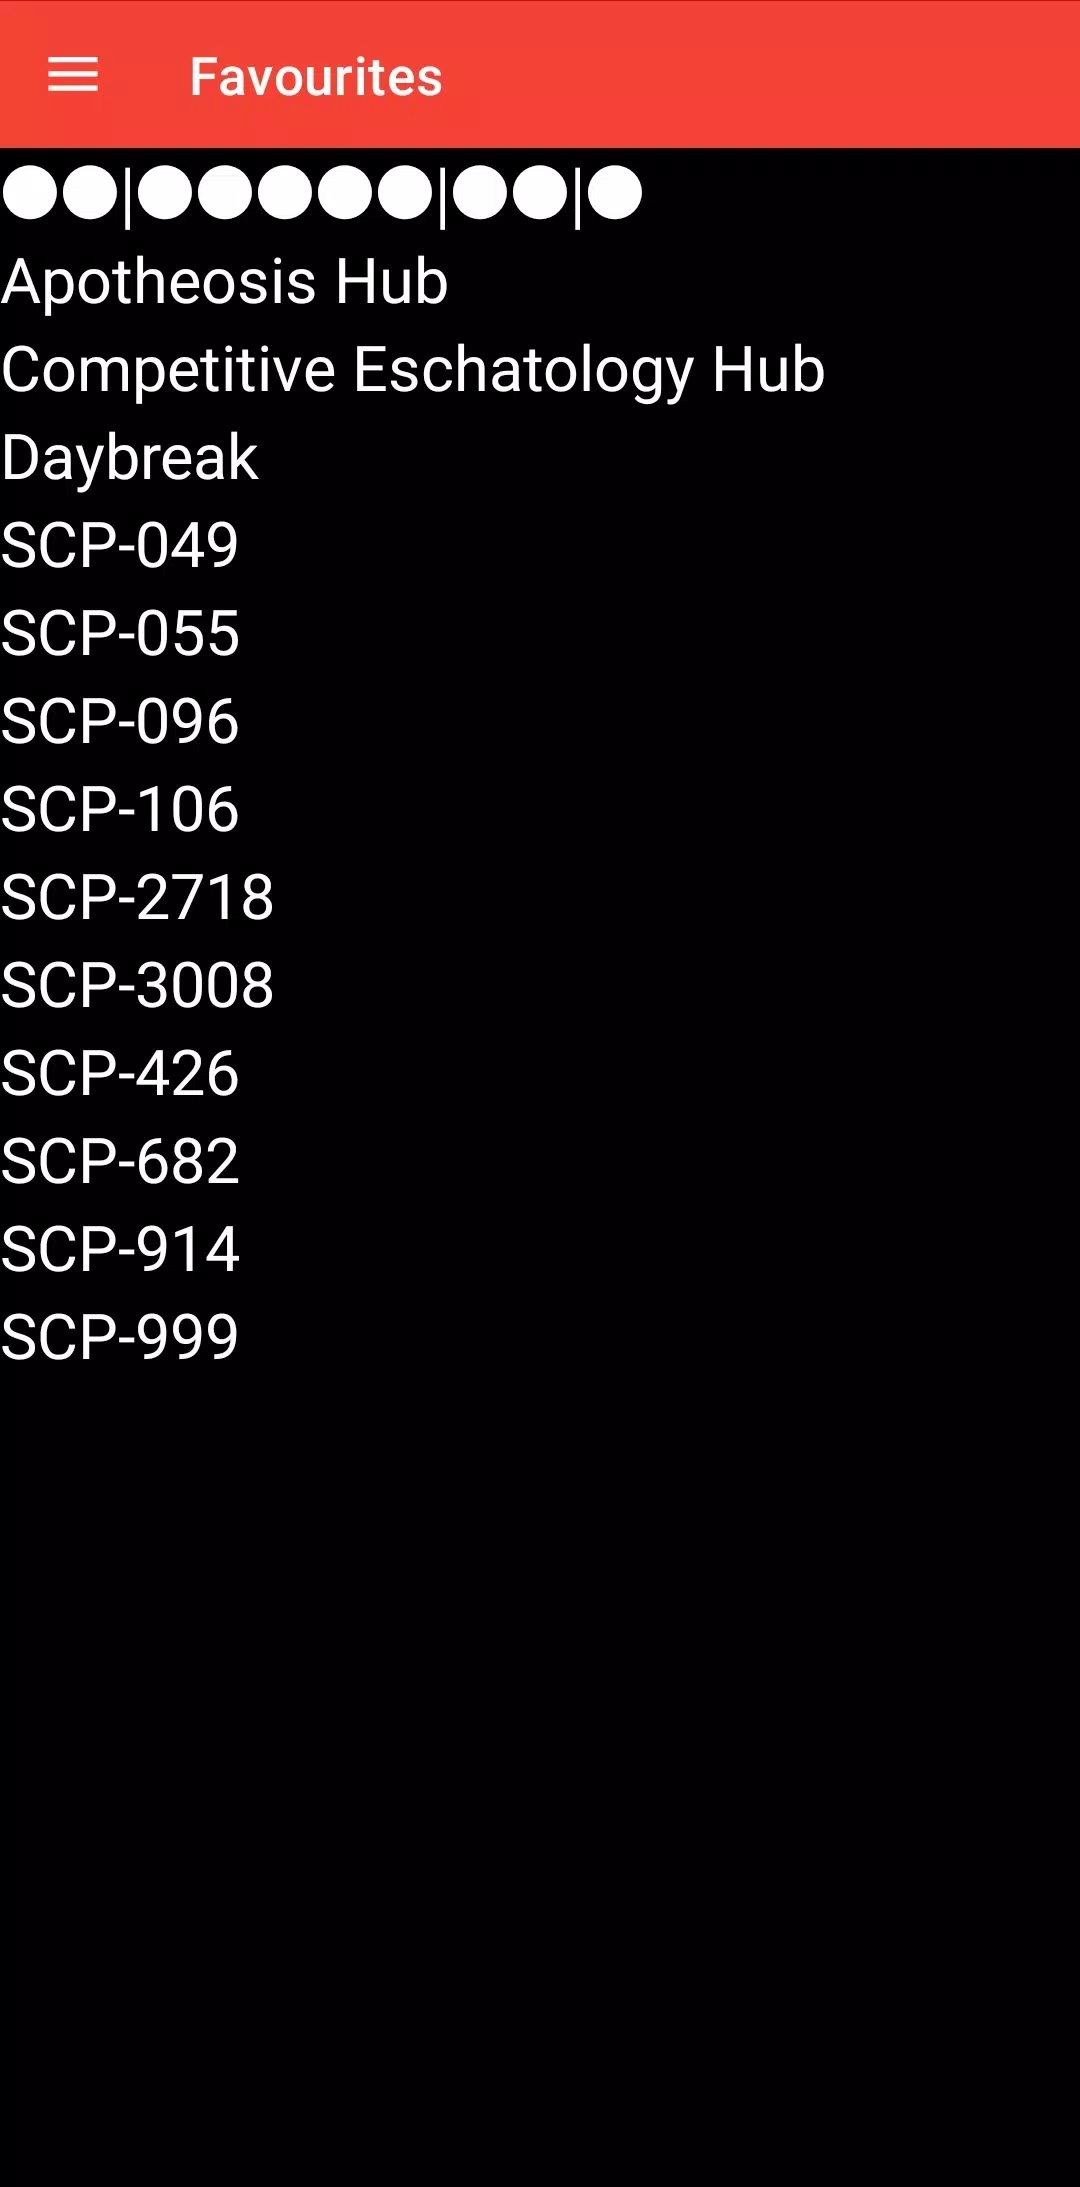 SCP Reader APK for Android - Download